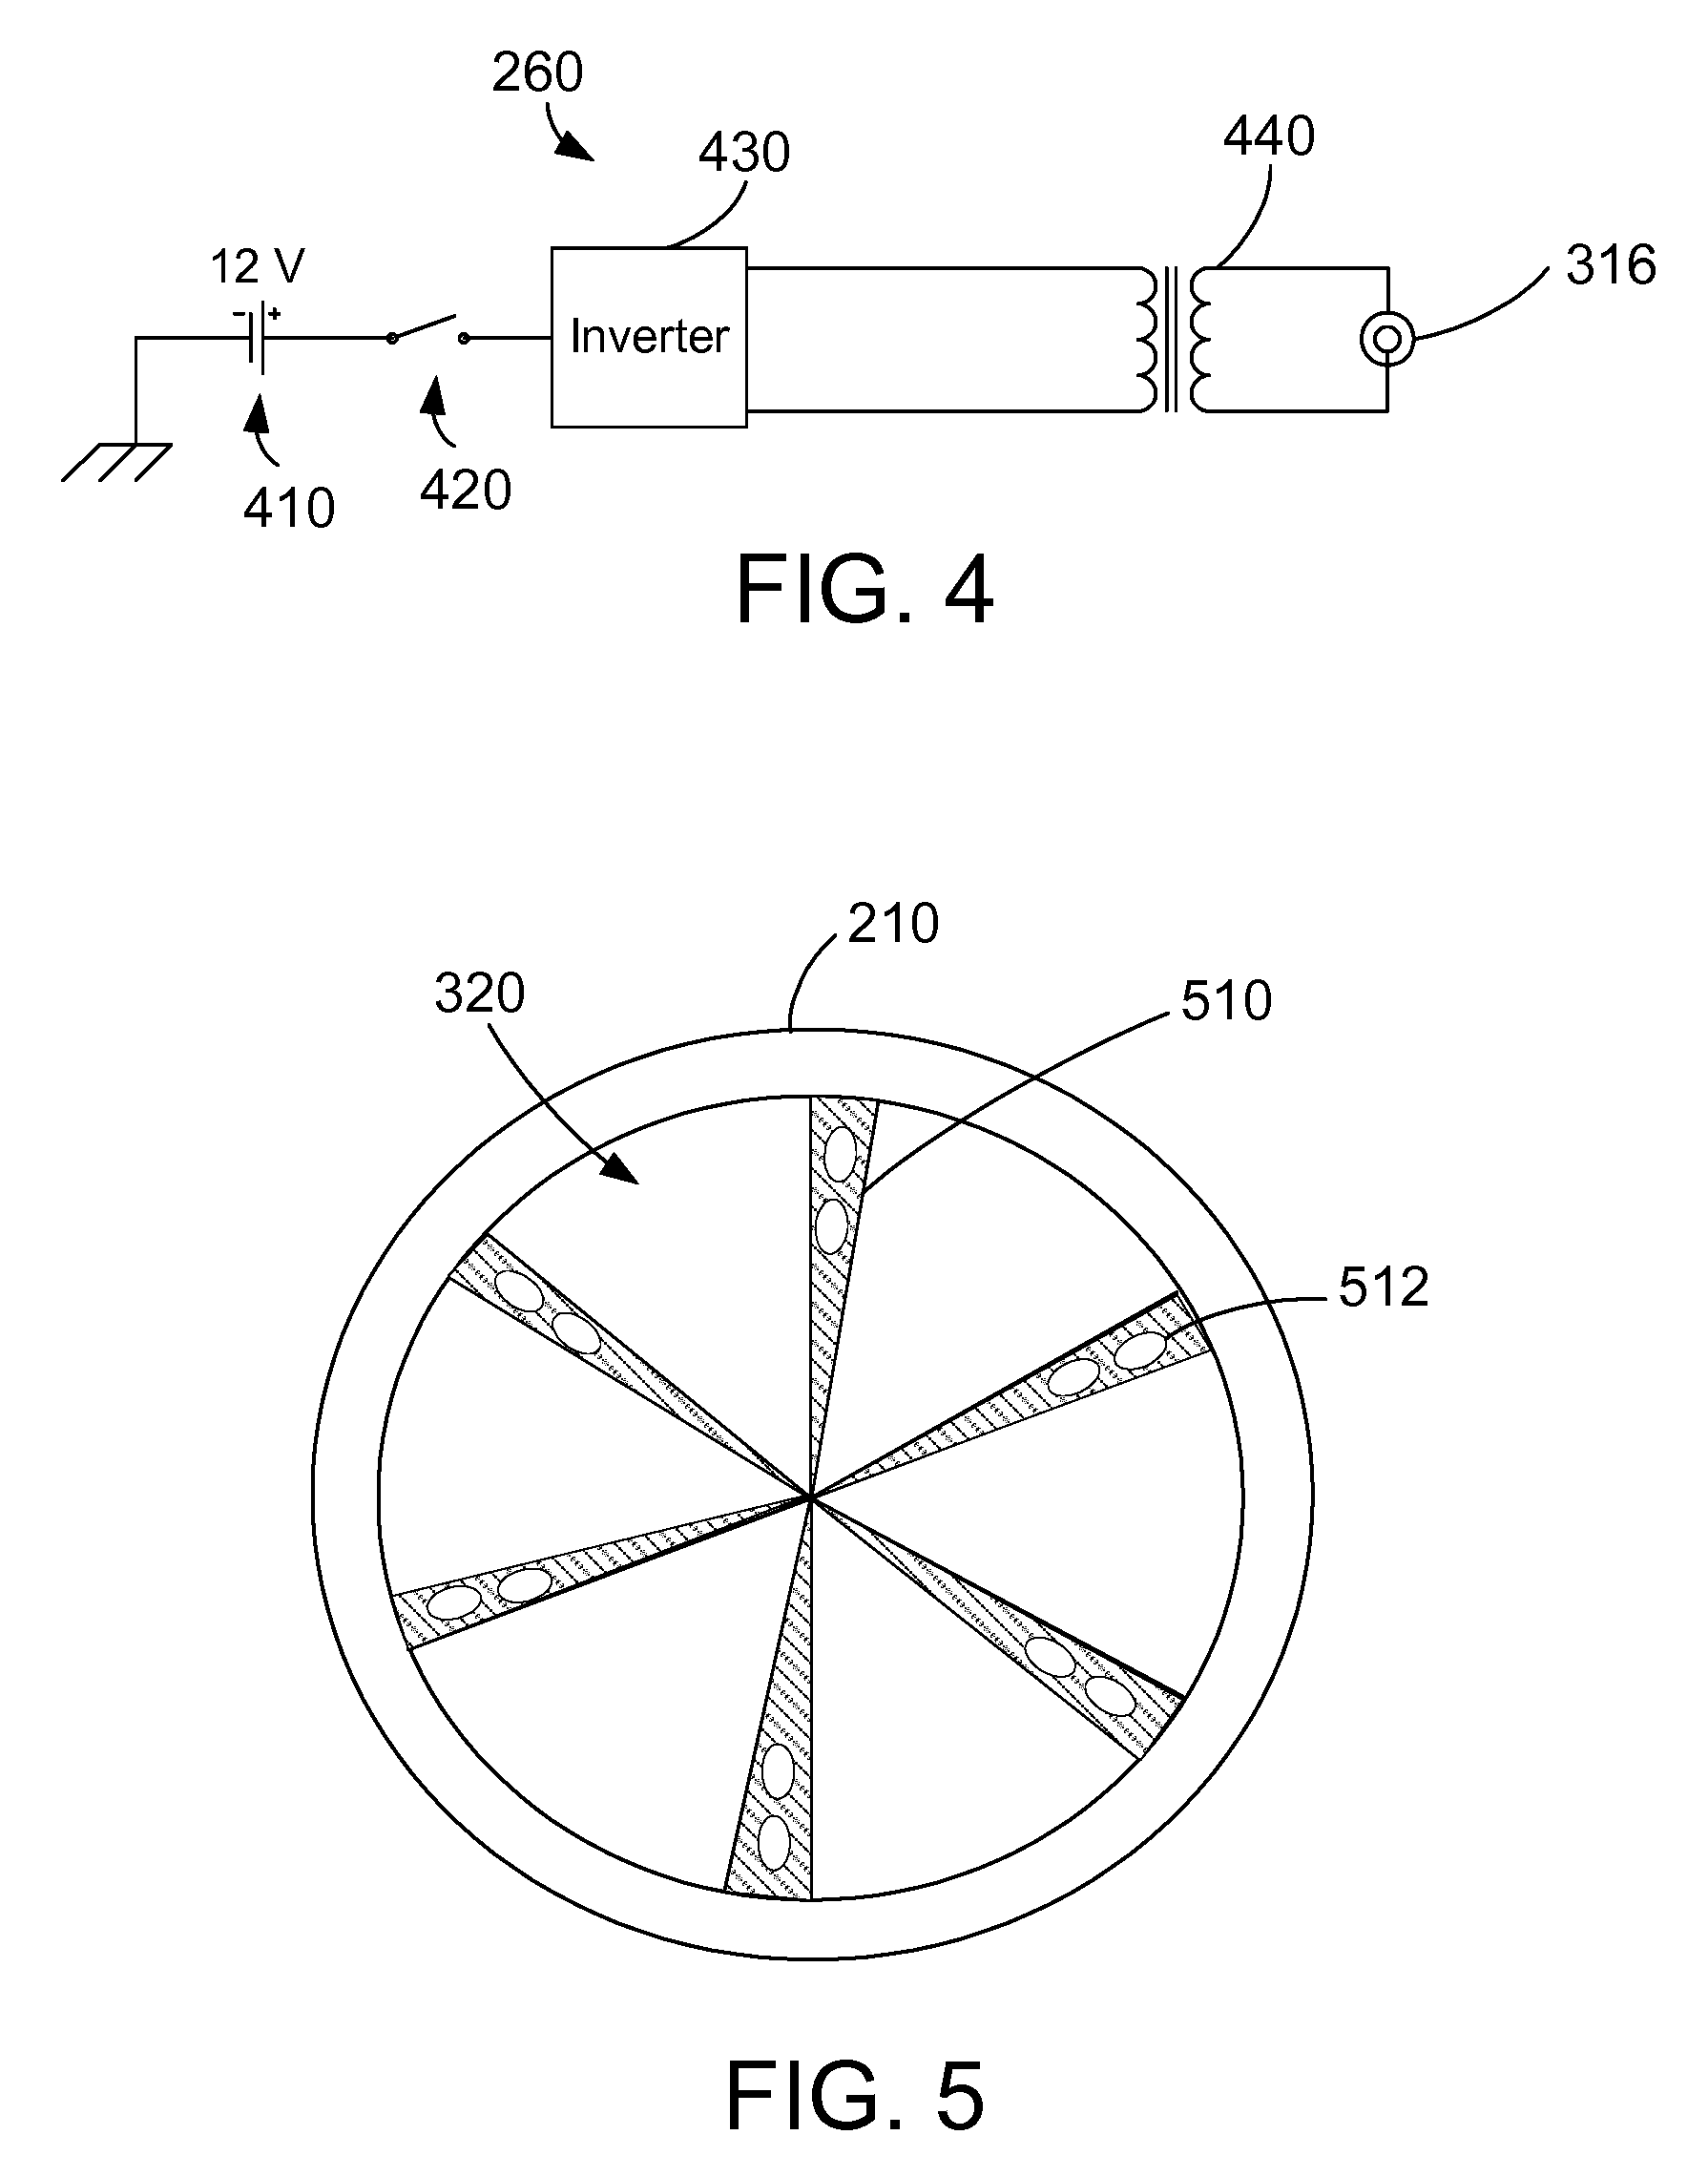 Apparatus for improving efficiency and emissions of combustion